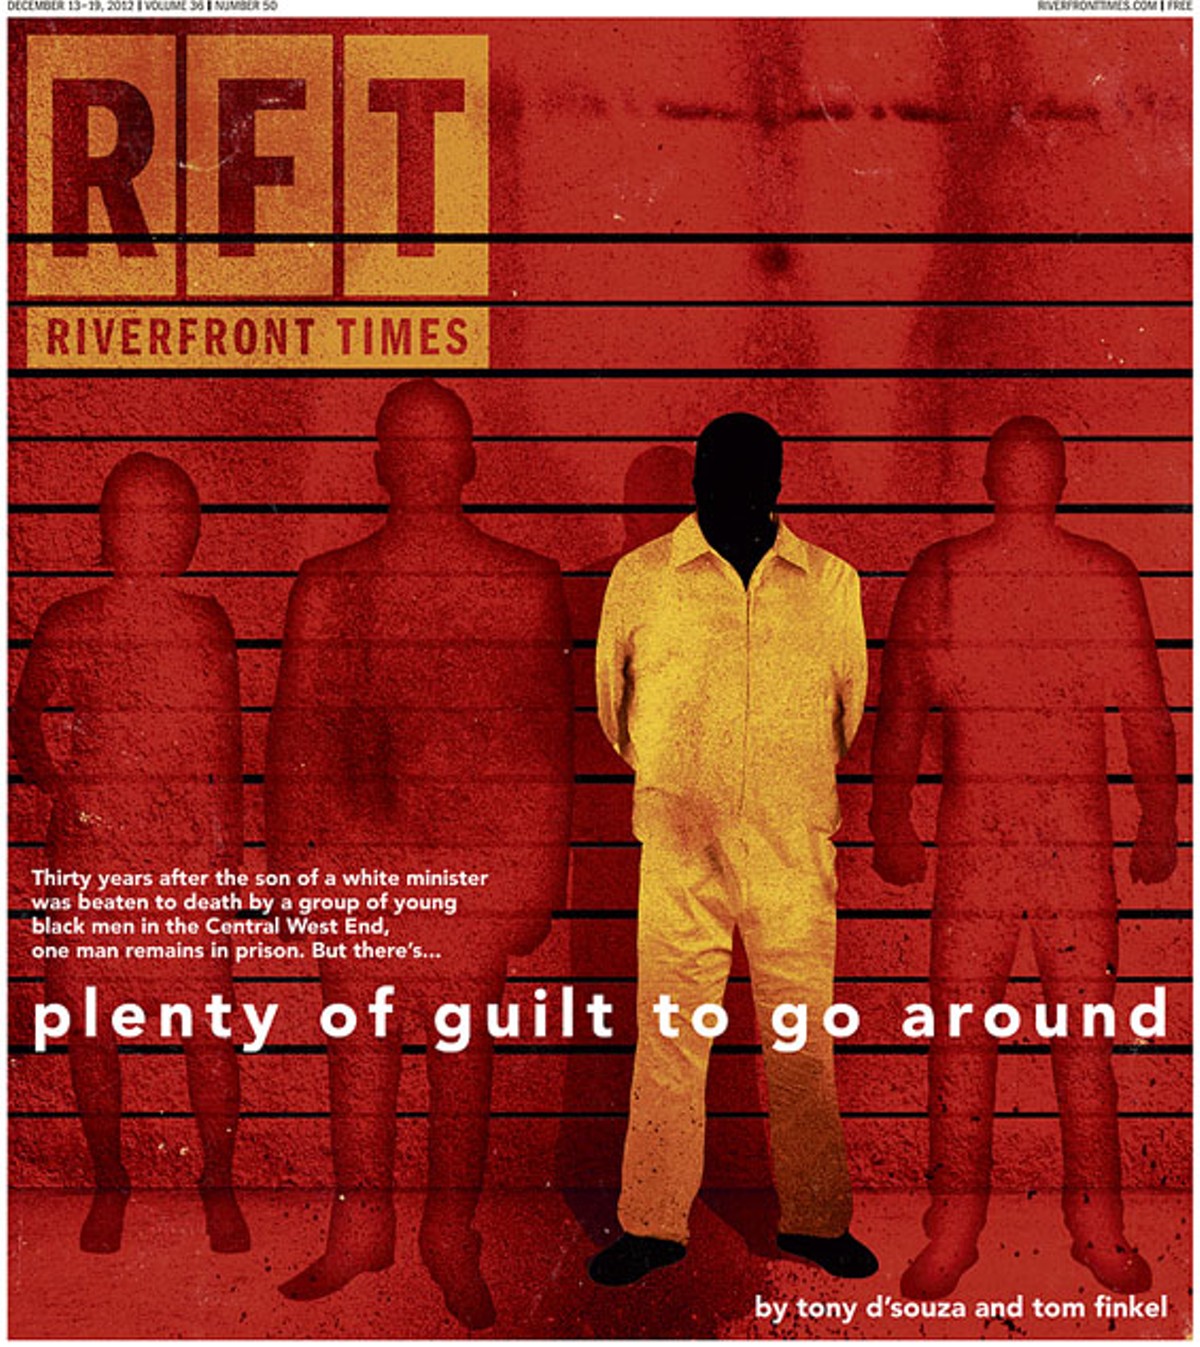 The Cover of the December 13 Print Edition